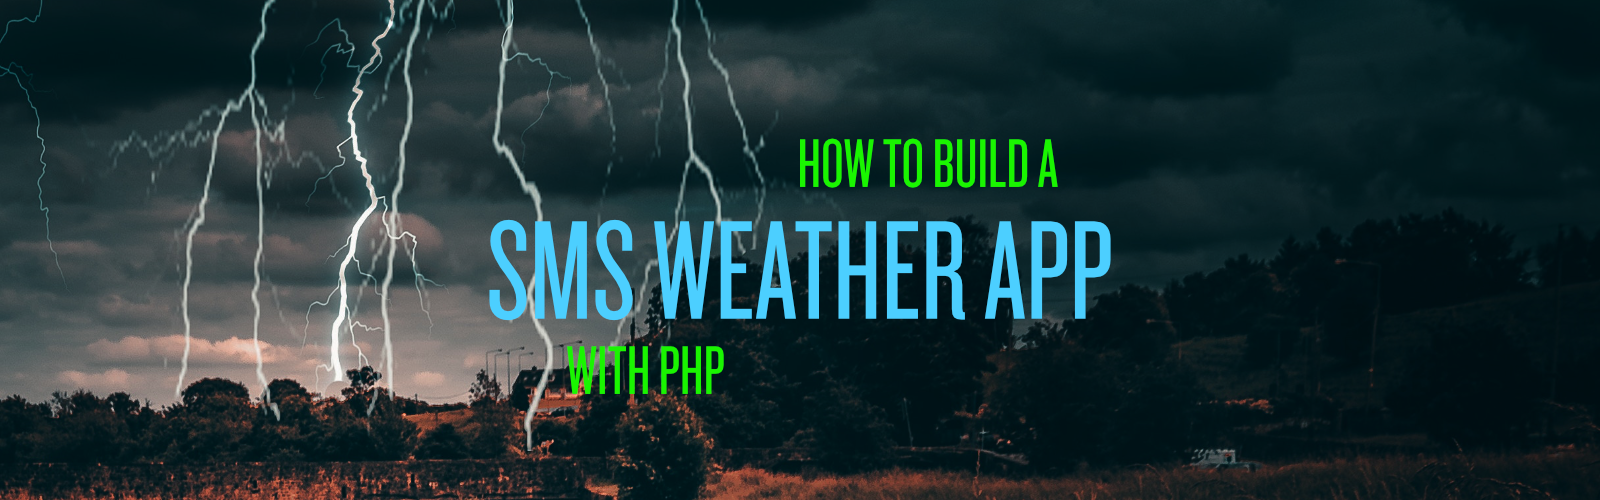 build-sms-weather-app-cover-photo.png